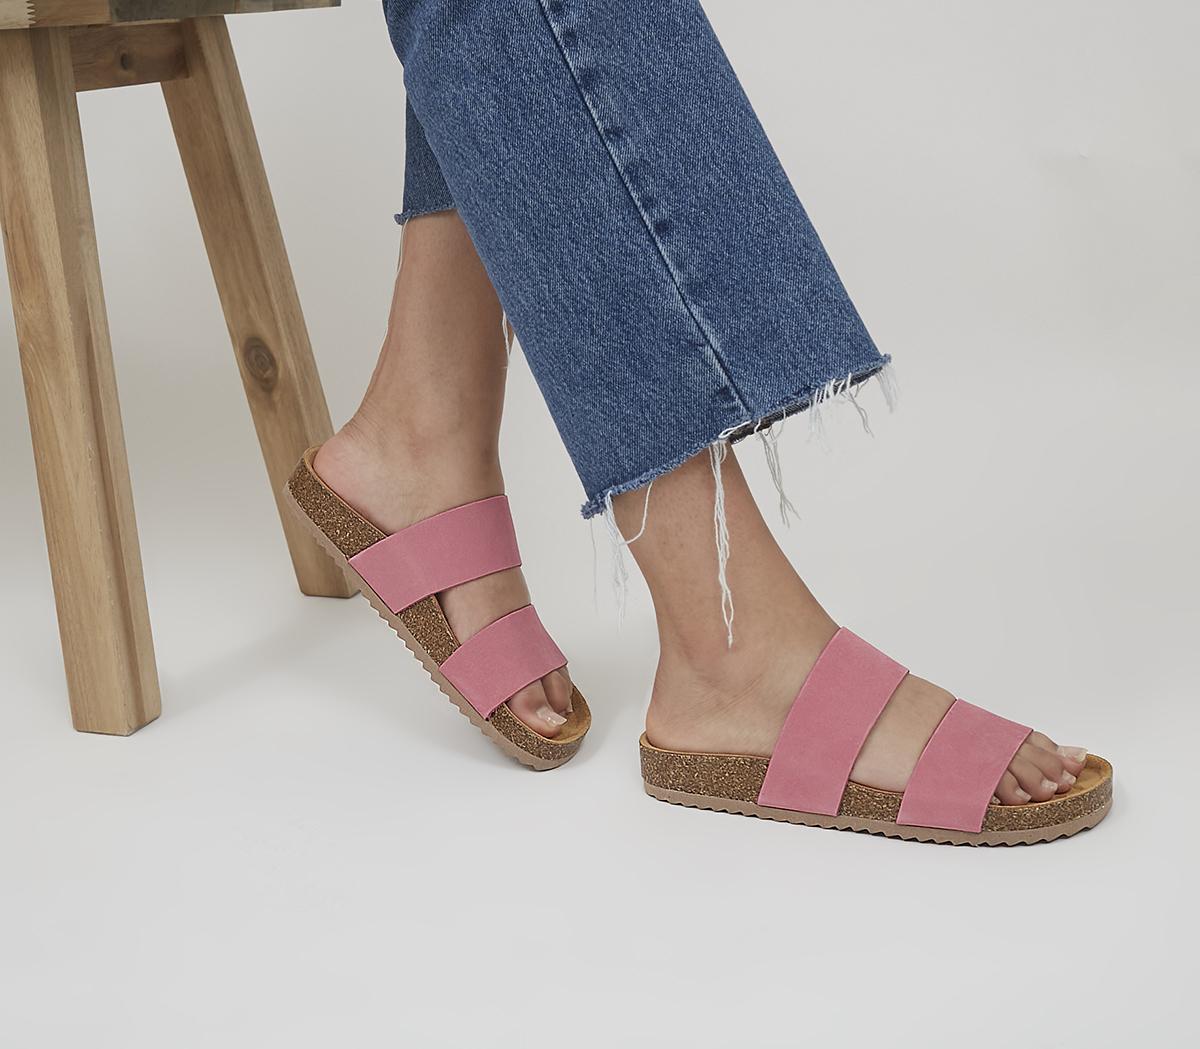 OFFICESwift Double Strap Footbed Flat SandalsCoral Pink Nubuck